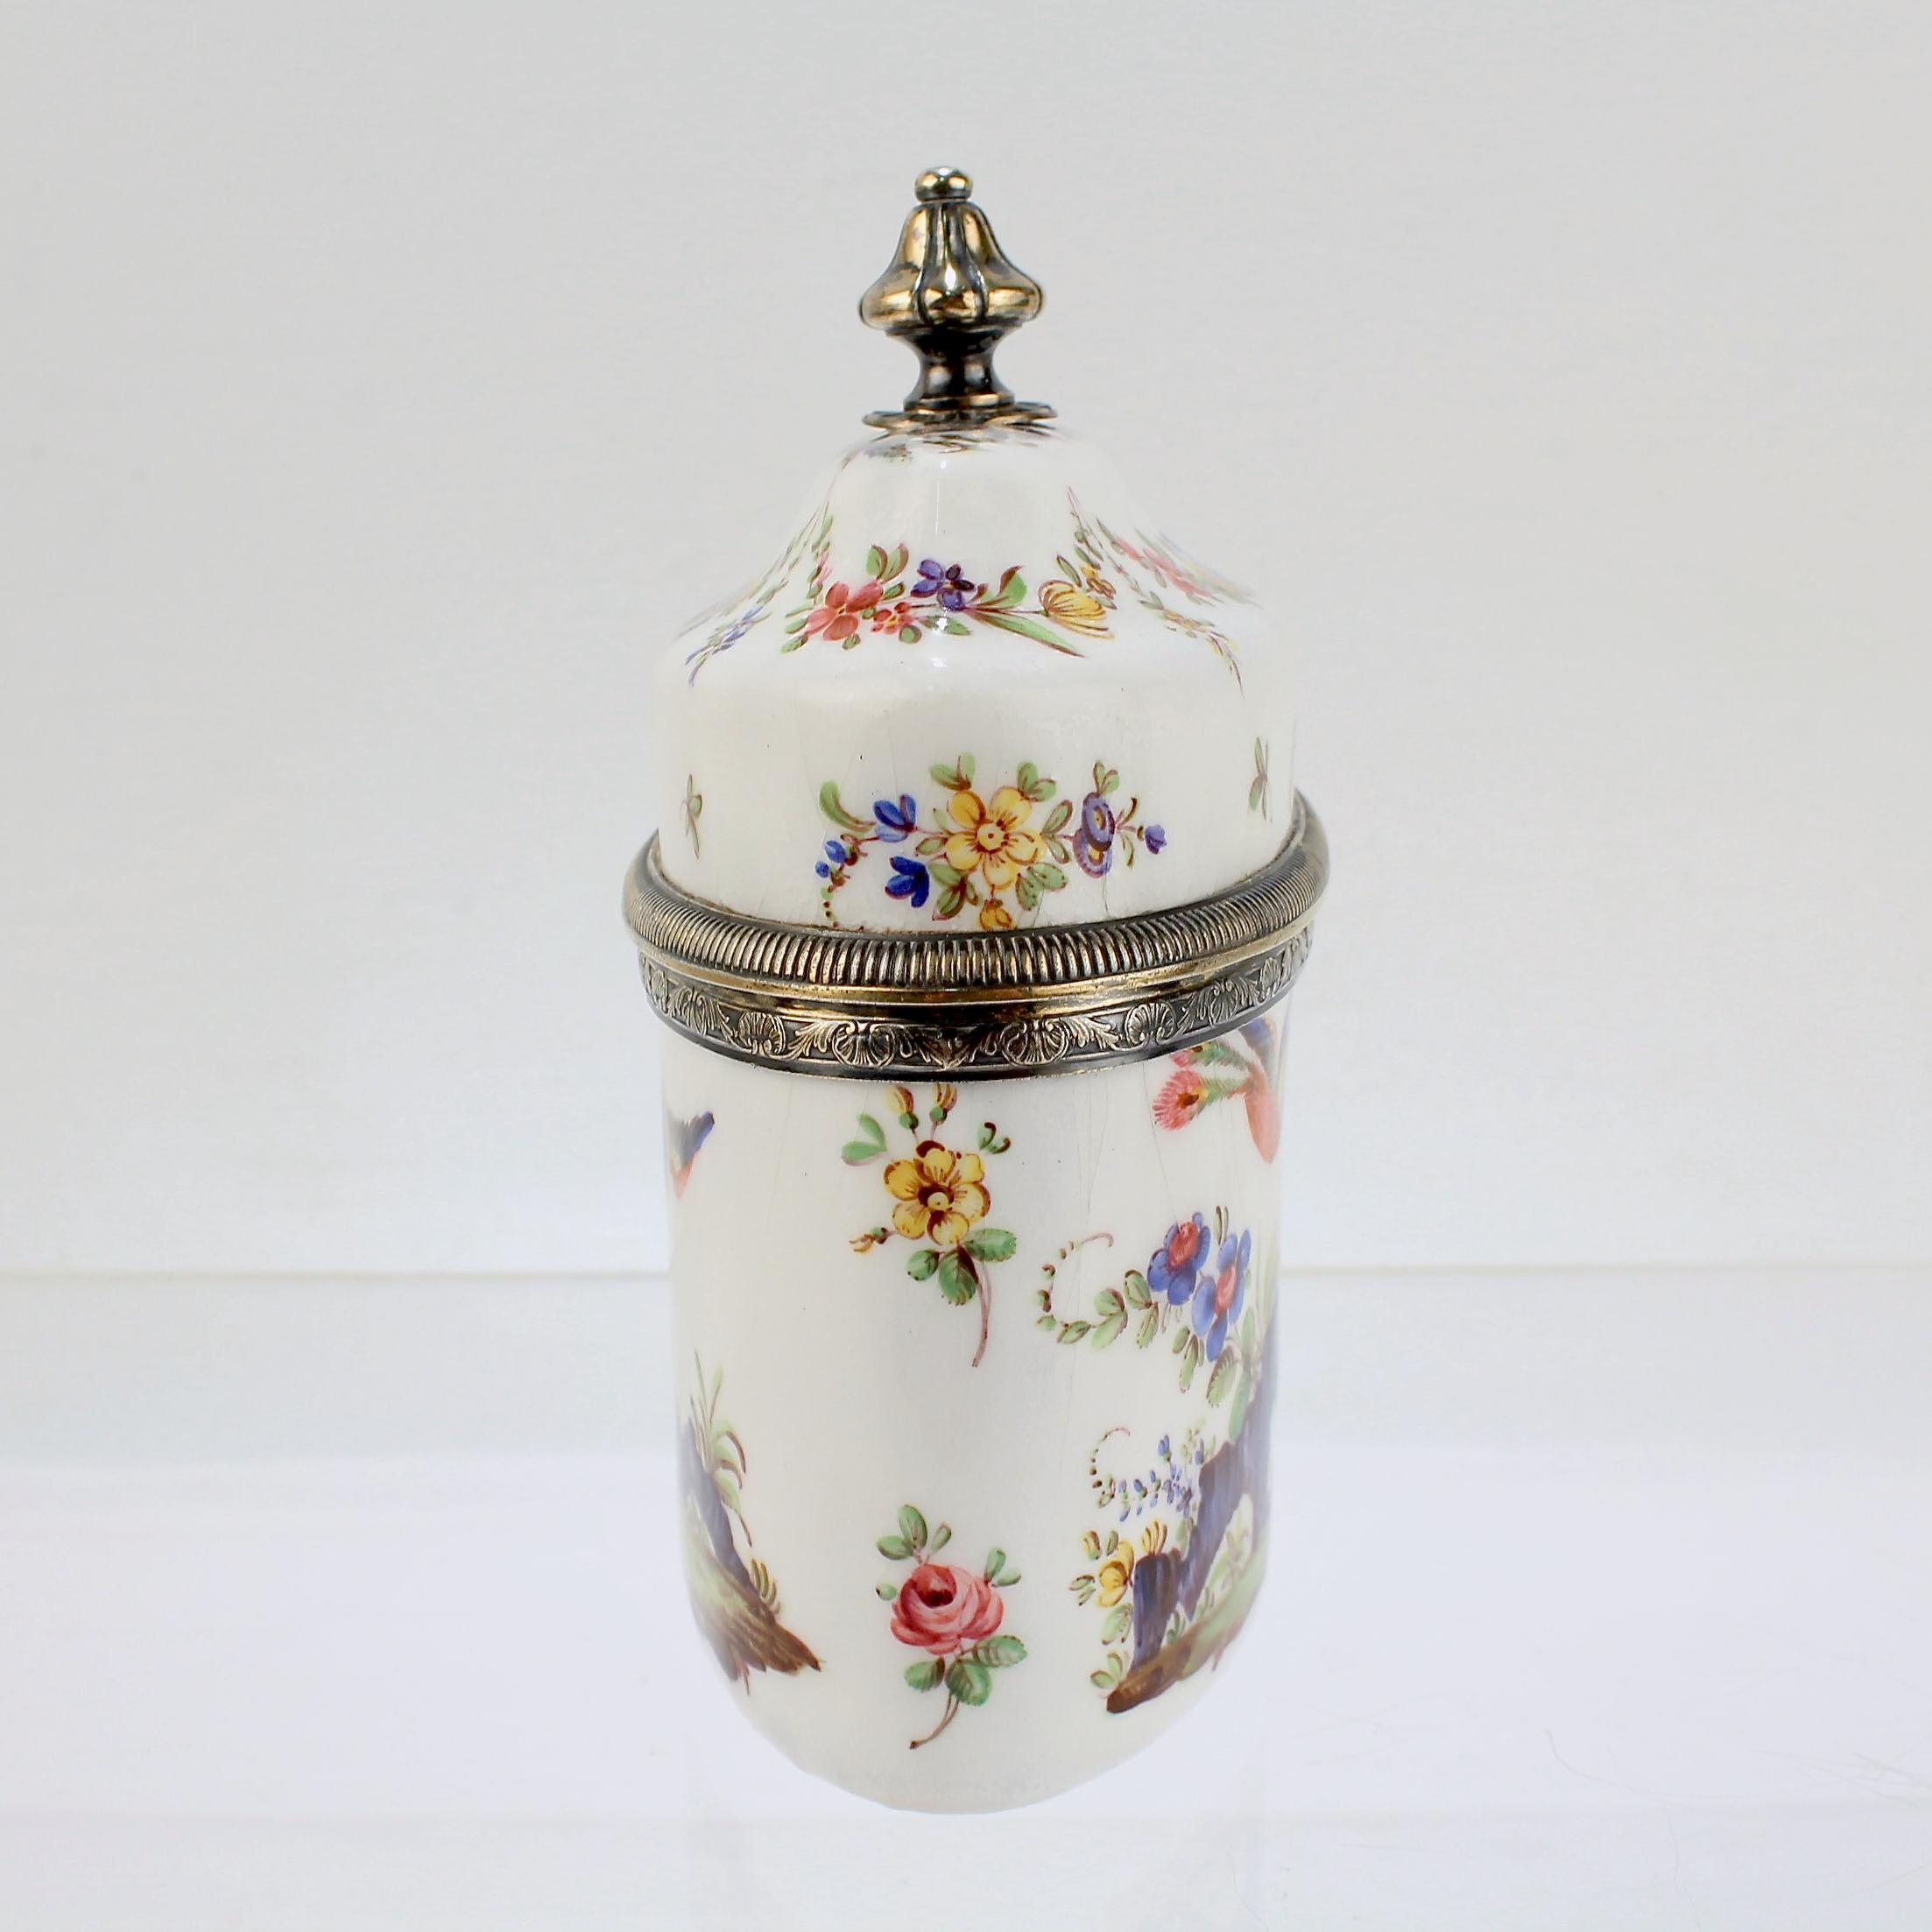 Beaux Arts Antique 19th Century French Beaux-Arts Silver-Mounted Enamel Tea Caddy by Risler For Sale